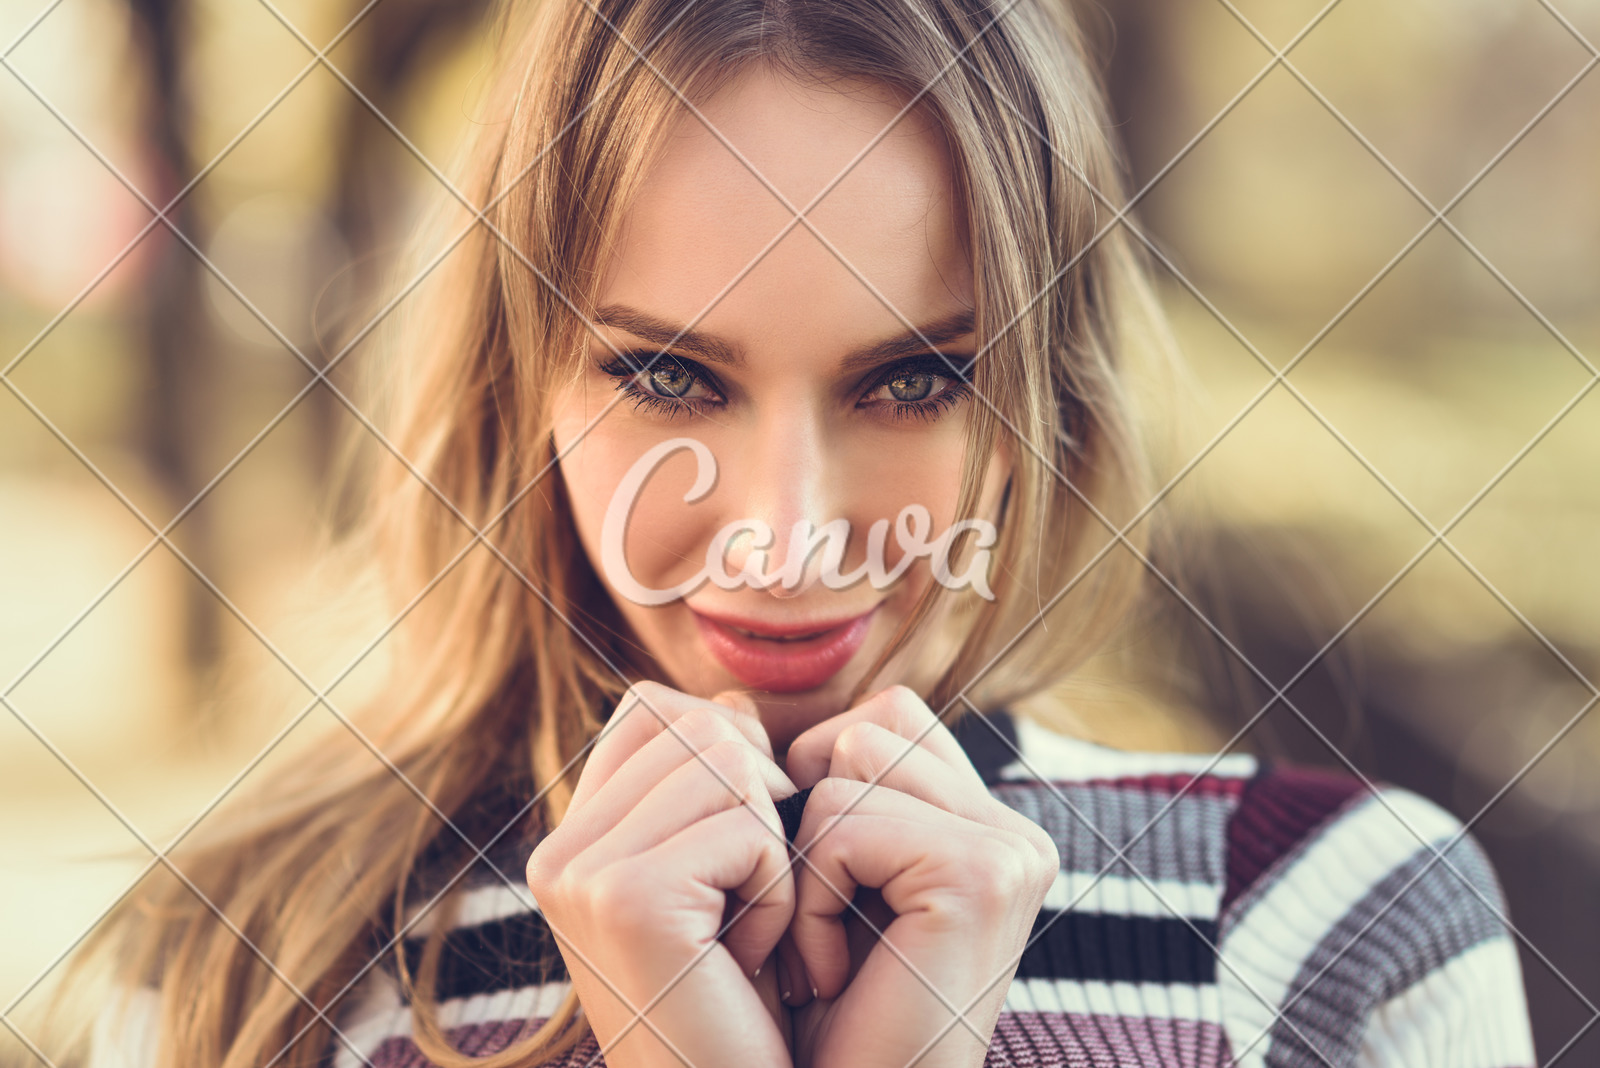 Close Up Portrait Of Young Blonde Woman With Blue Eyes Photos By